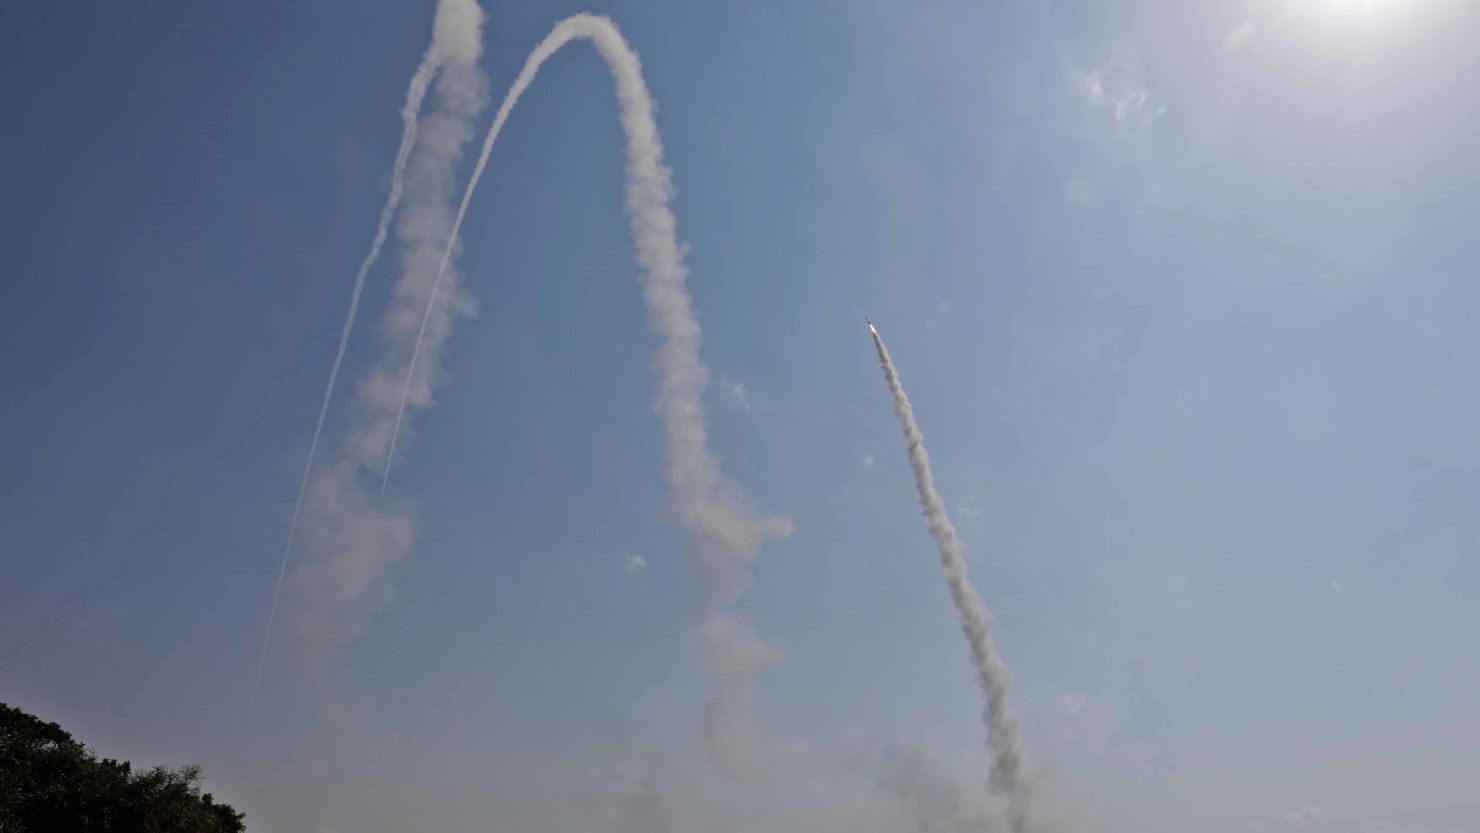 TOPSHOT - Israeli military launch a missile from the Iron Dome air defence system, designed to intercept and destroy incoming short-range rockets and artillery shells, from a position in the southern Israeli city of Ashkelon on May 29 2018.